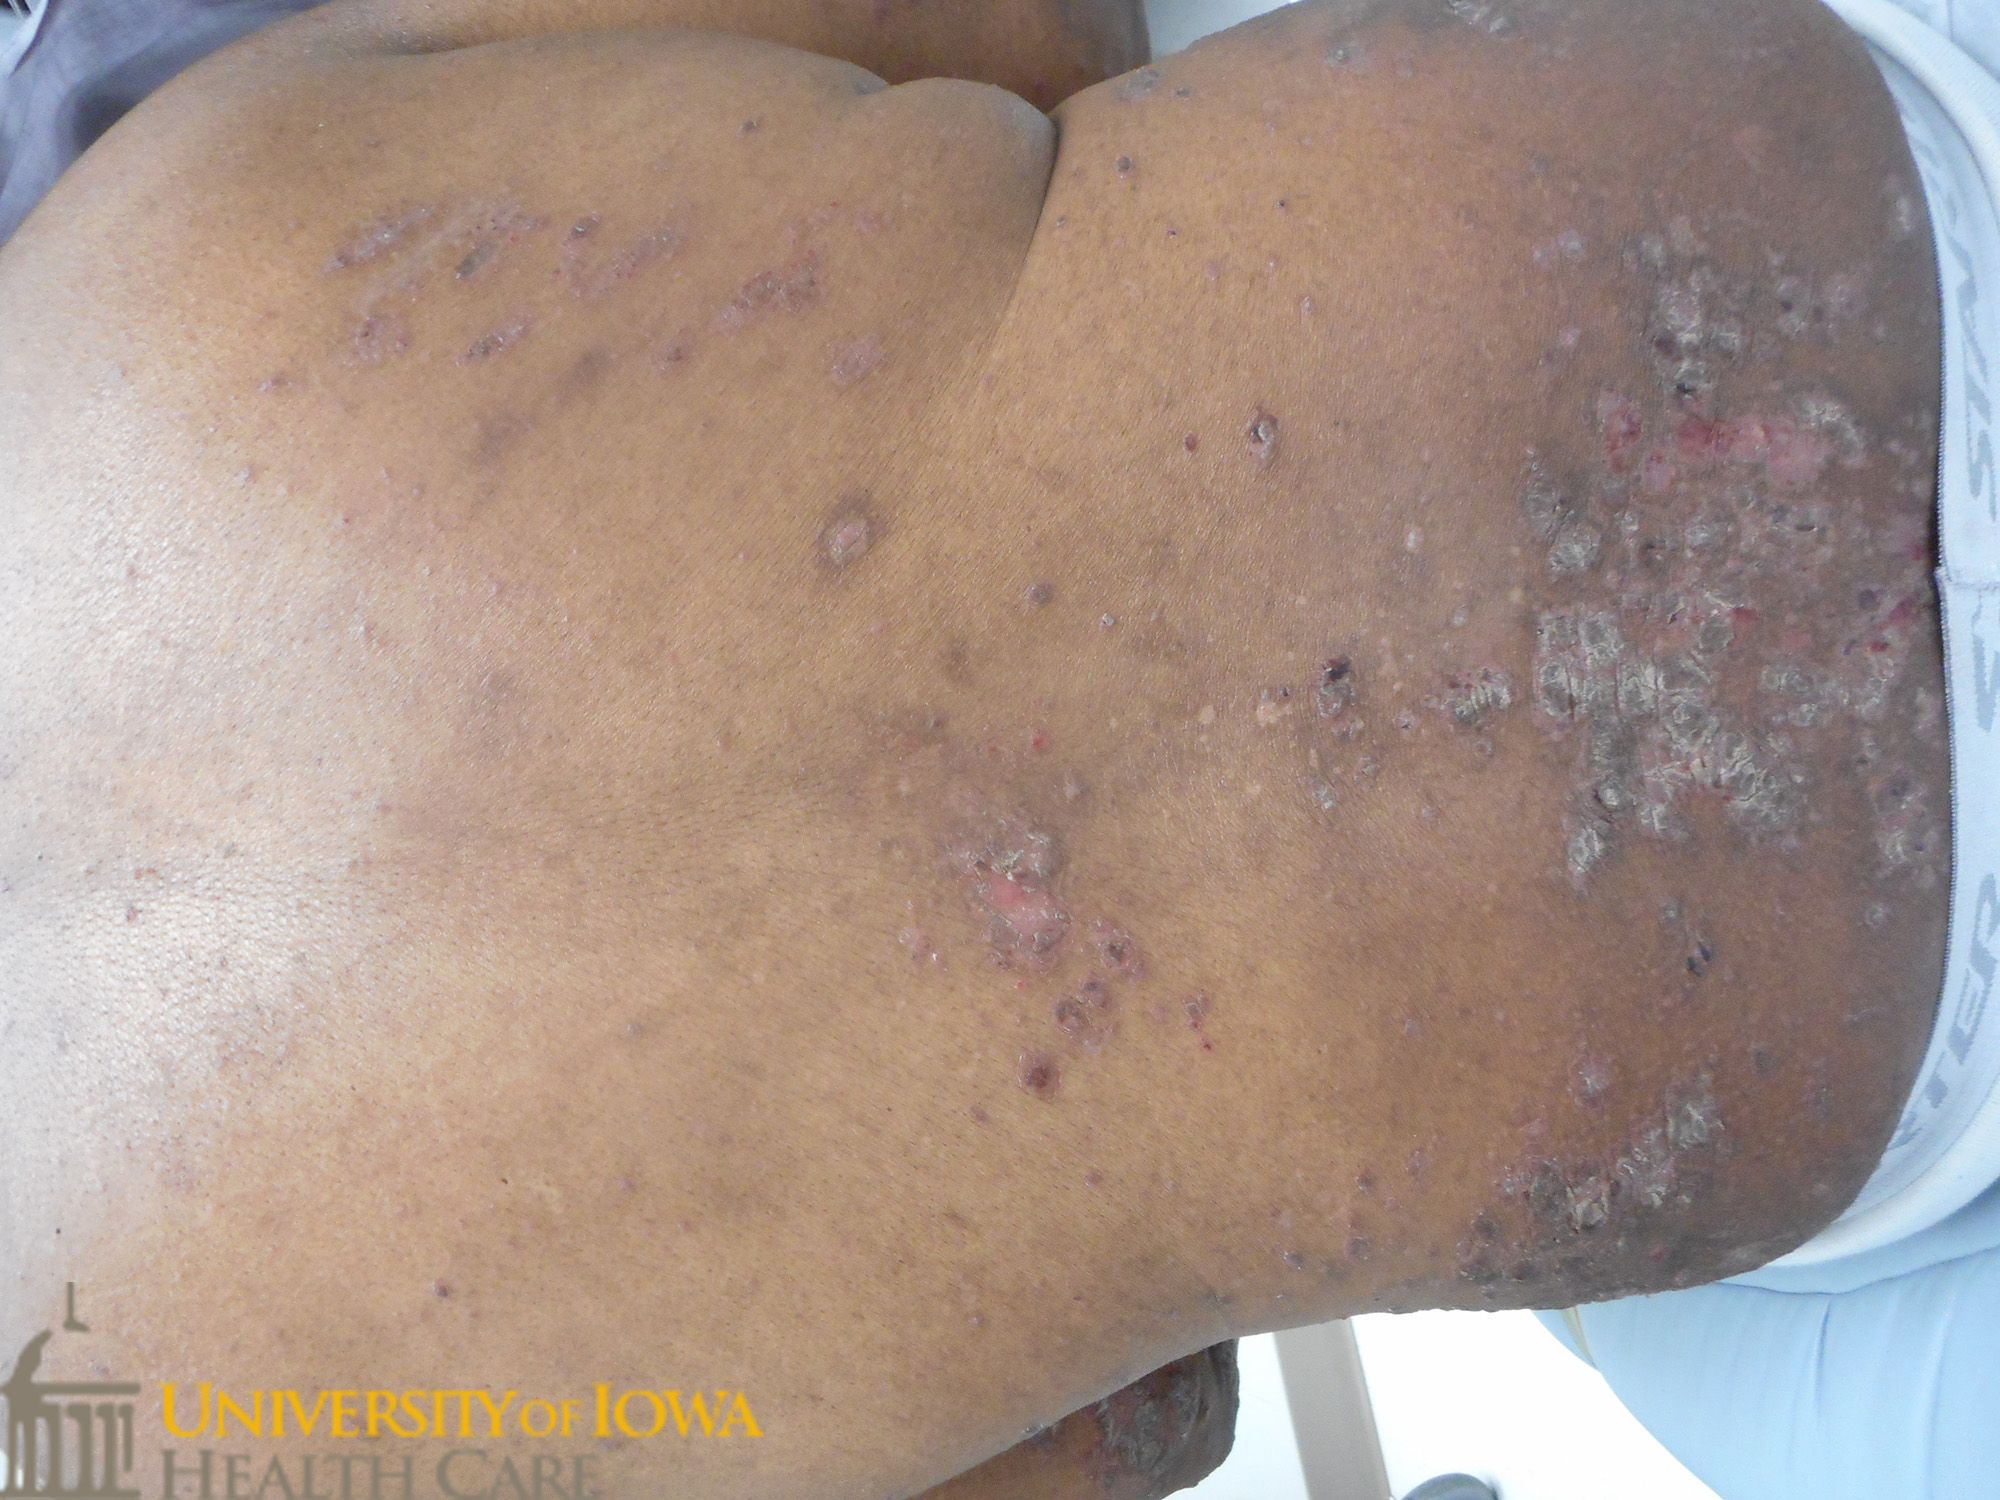 Pink to gray thick scaly papules and plaques on the back. (click images for higher resolution).